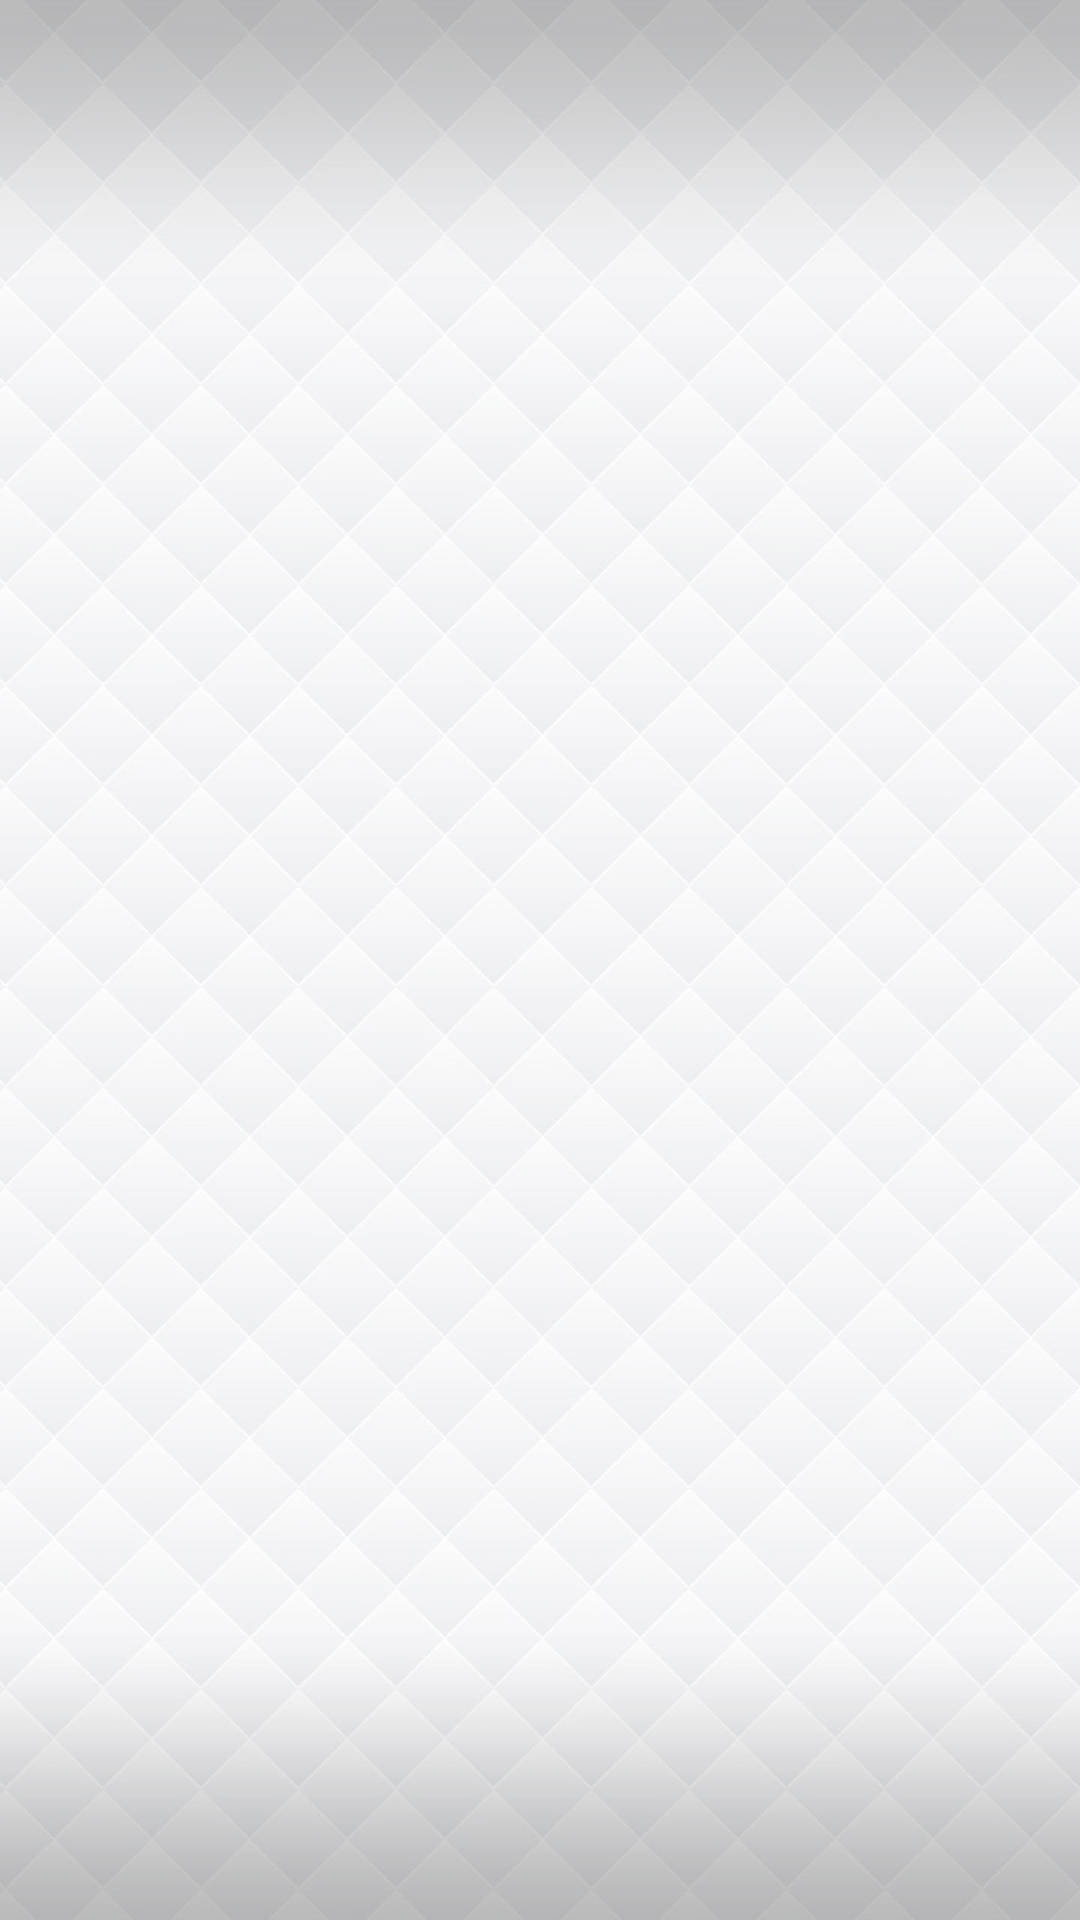 Small-tile Pattern For White Screen Phone Background